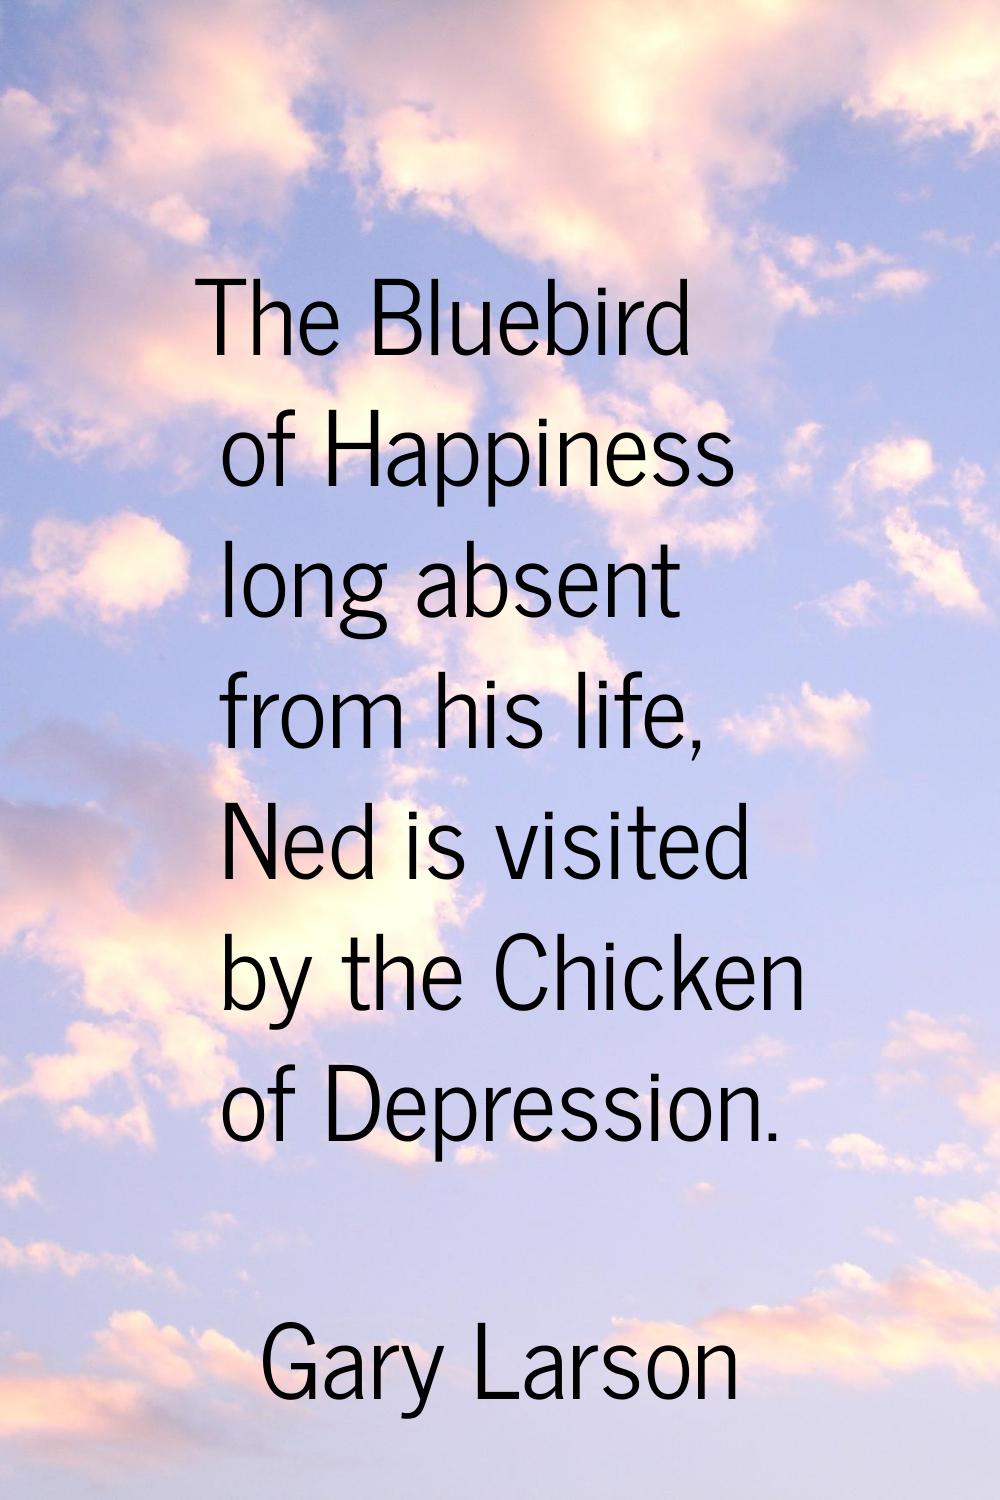 The Bluebird of Happiness long absent from his life, Ned is visited by the Chicken of Depression.